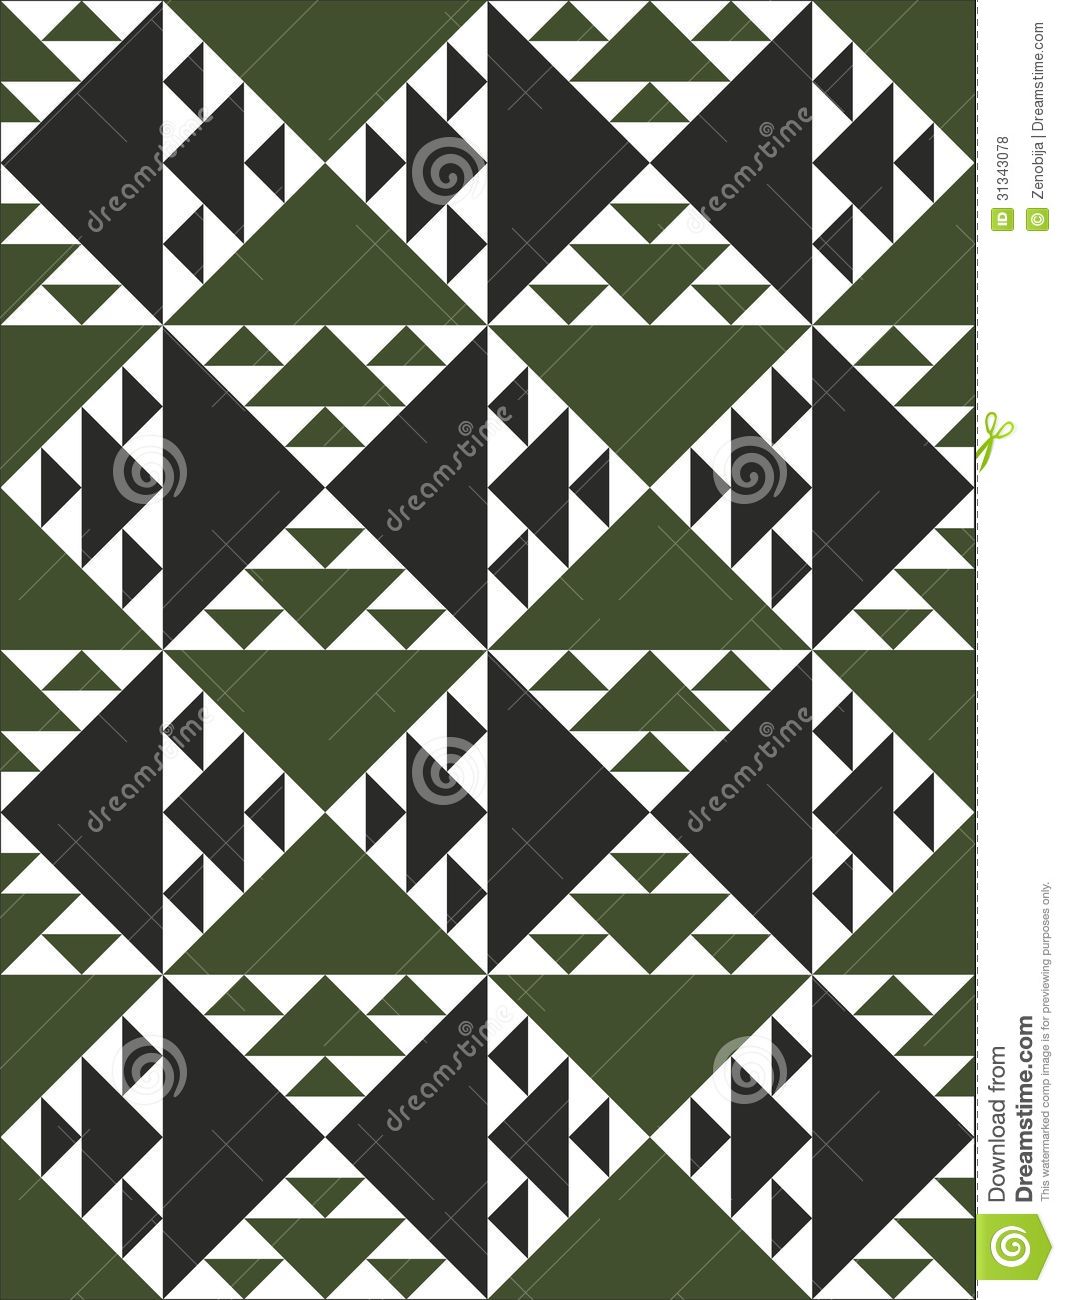 The Geometric Repeating Patterns Royalty Free Stock Photos   Image    